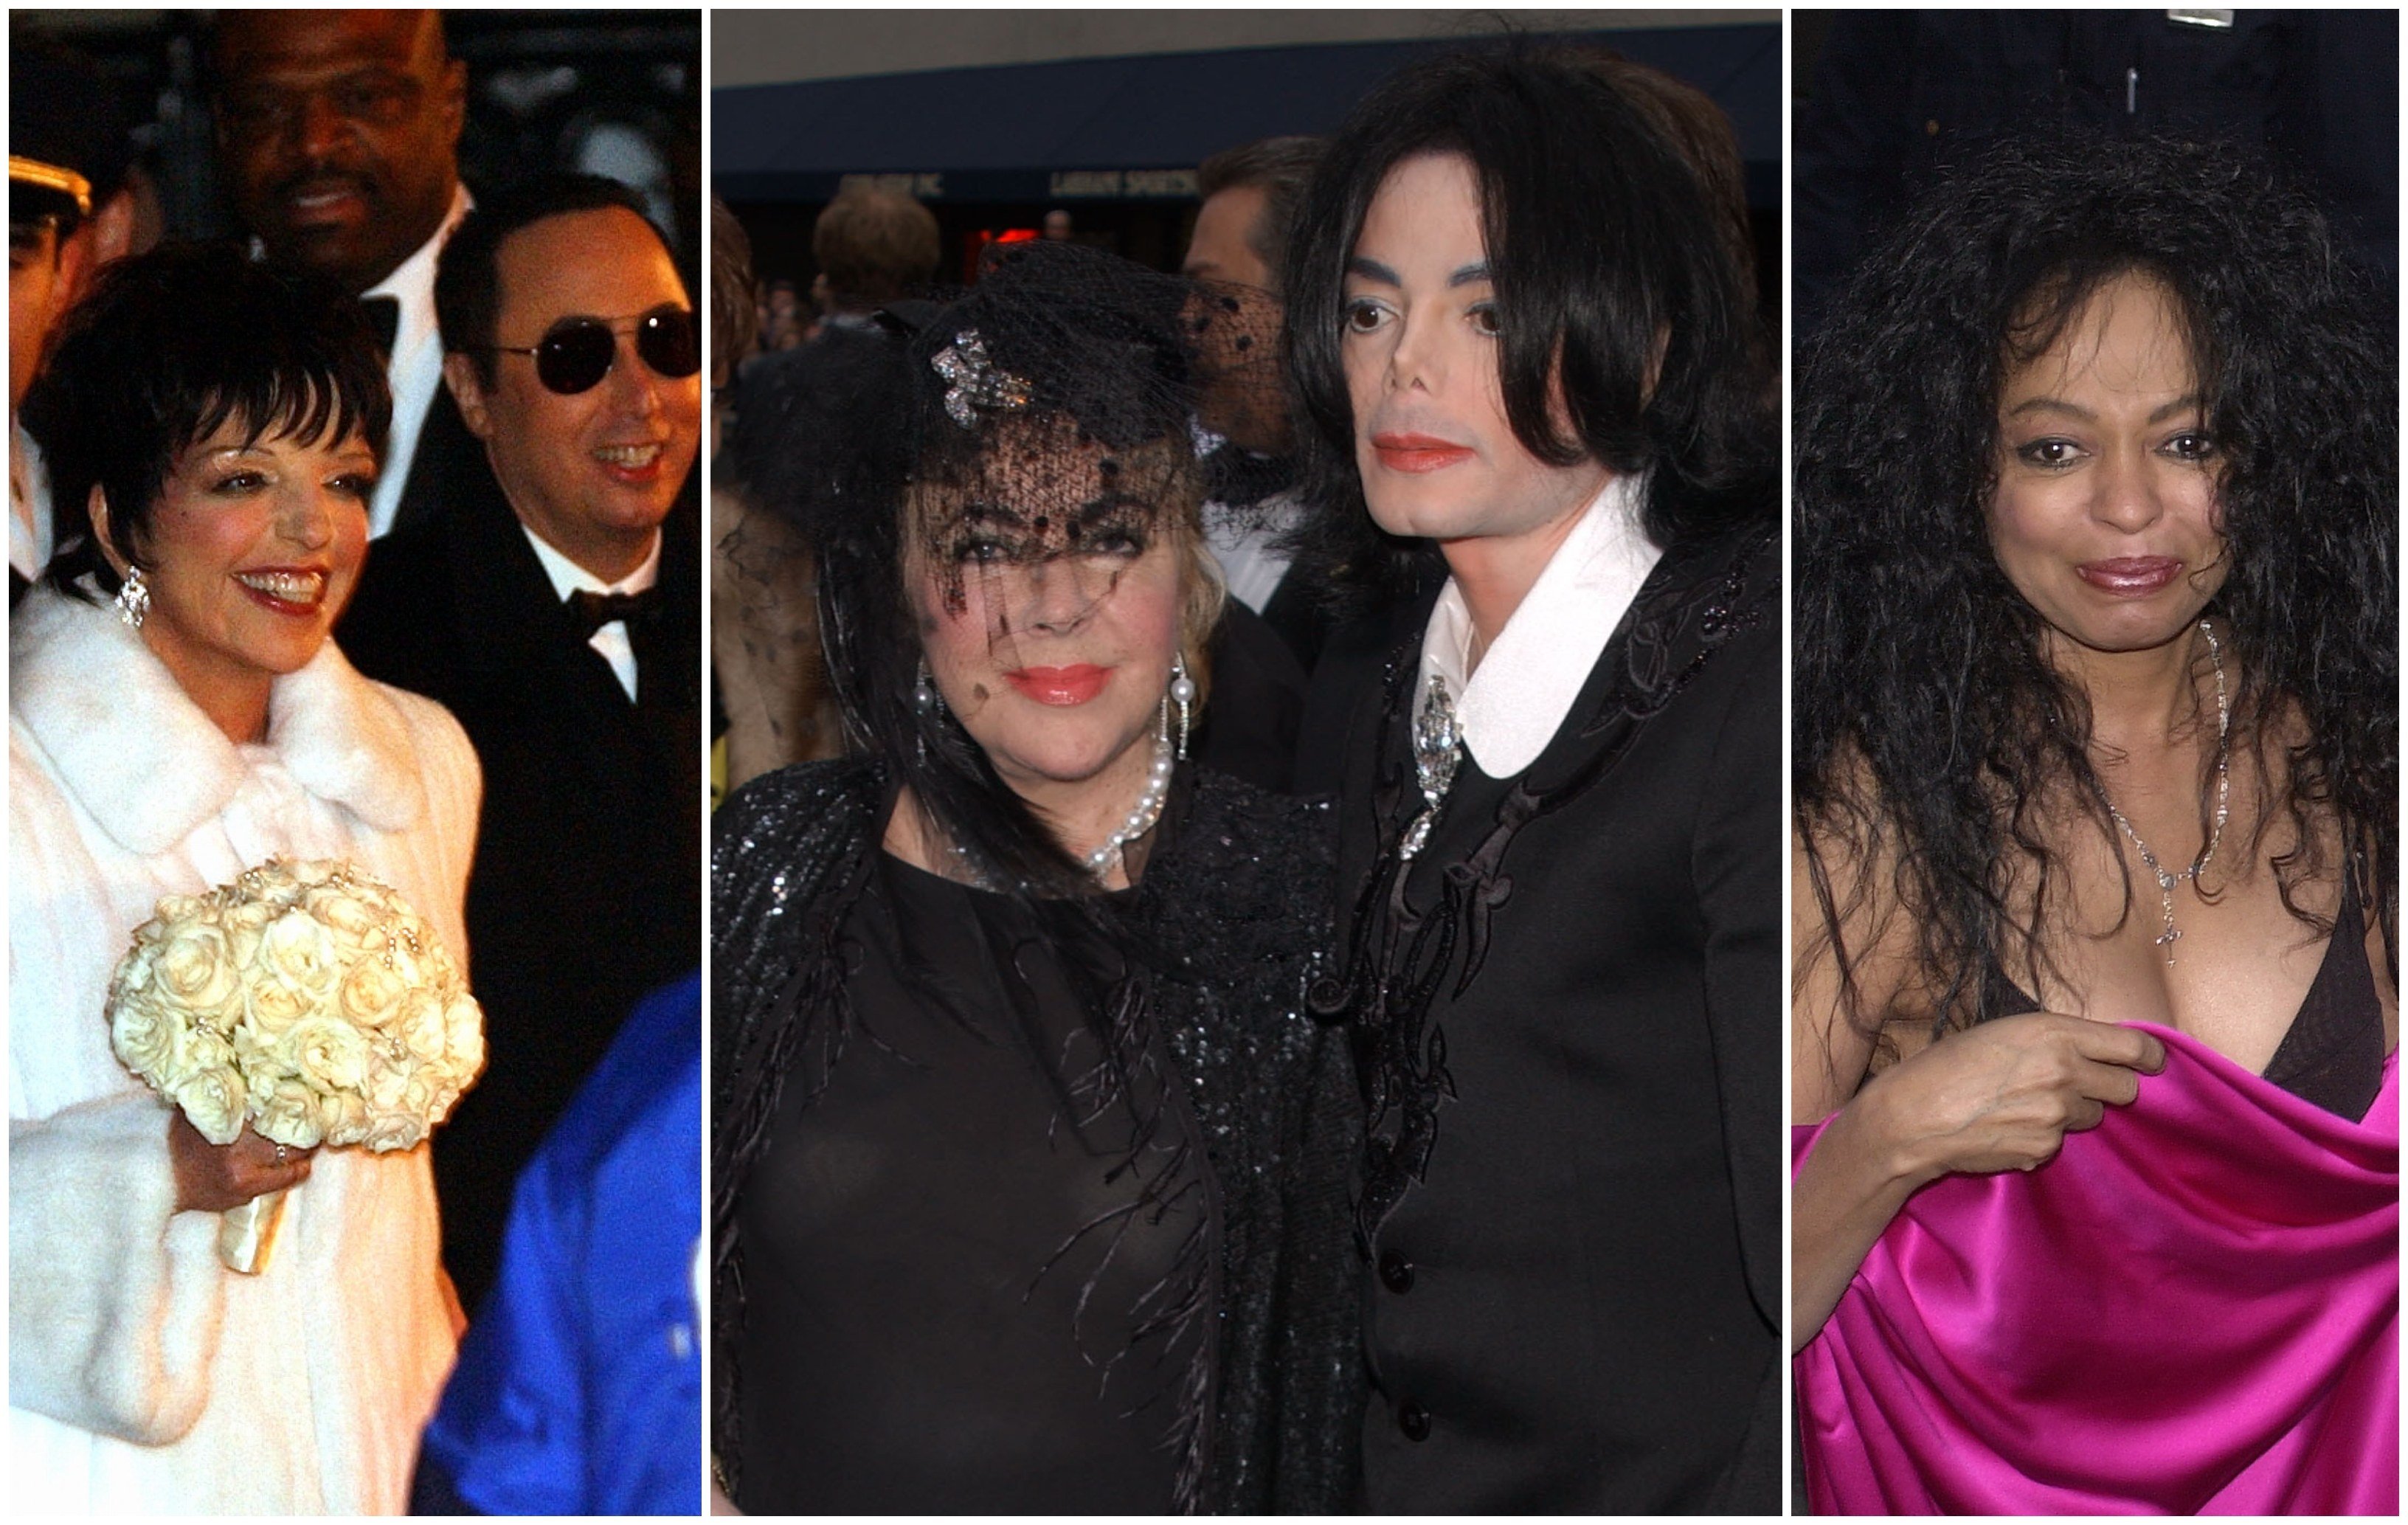 Stars like Michael Jackson, Elizabeth Taylor and Diana Ross attended Liza Minnelli’s nuptials to David Gest in 2002. Photos: Getty